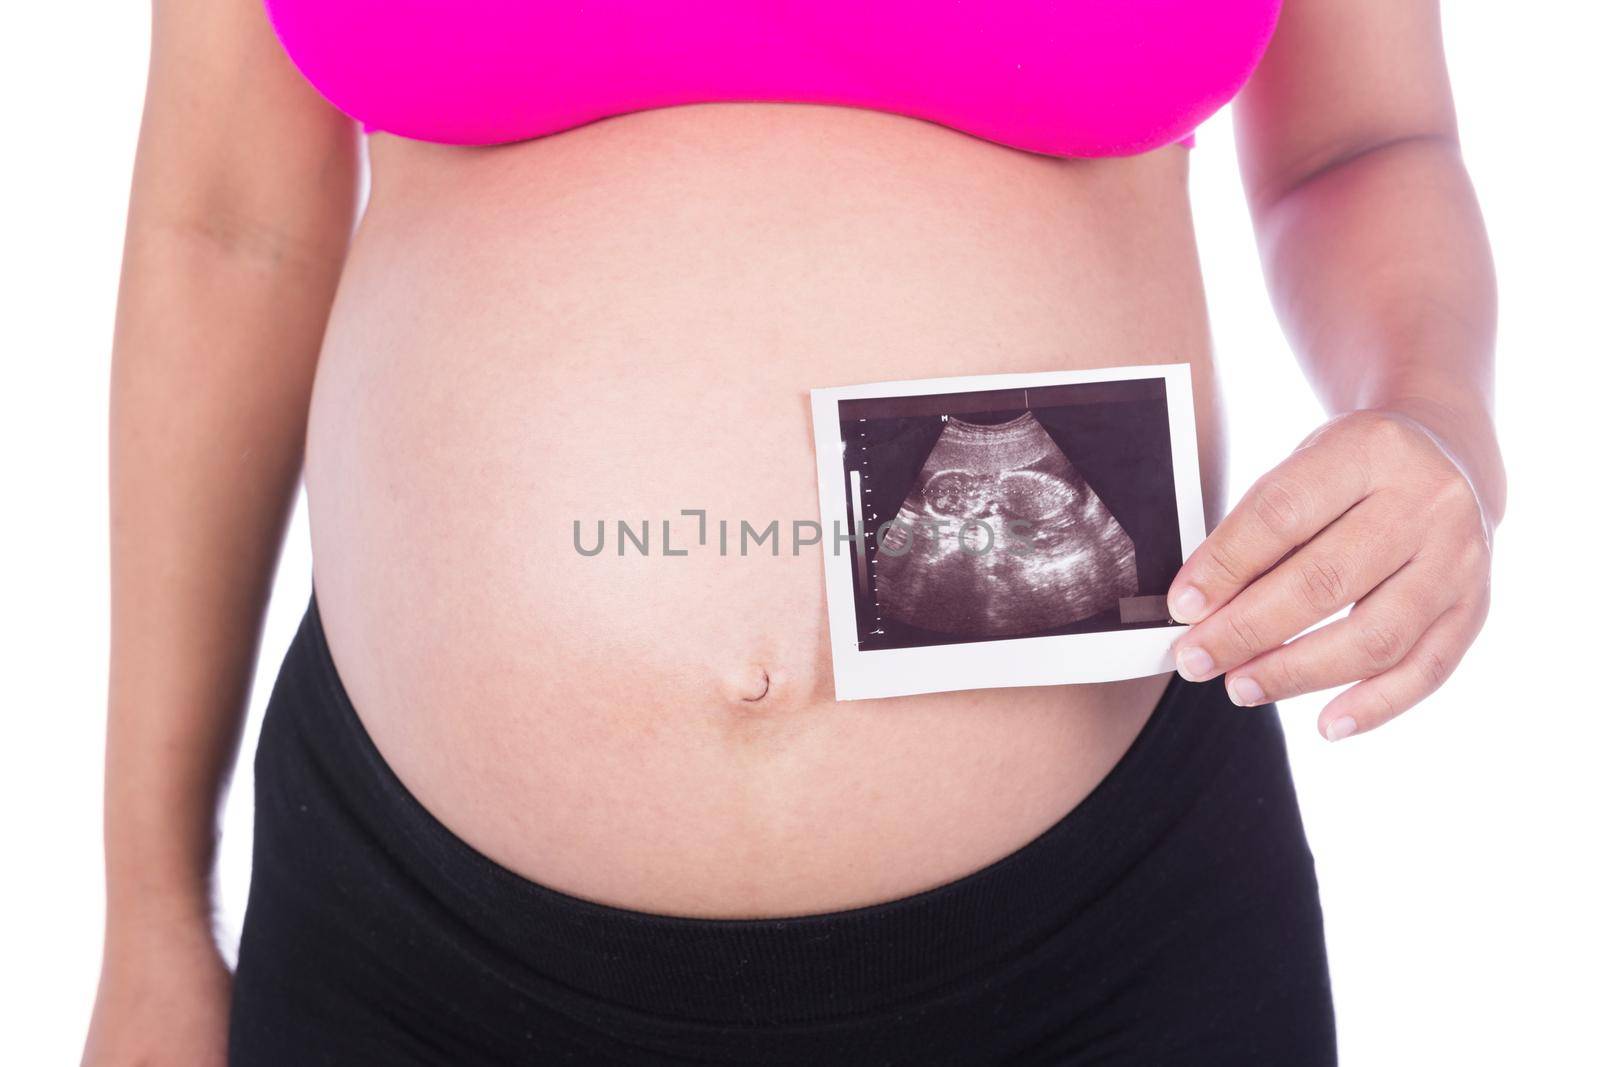 Pregnant woman hands holding ultrasound photo on white background by geargodz